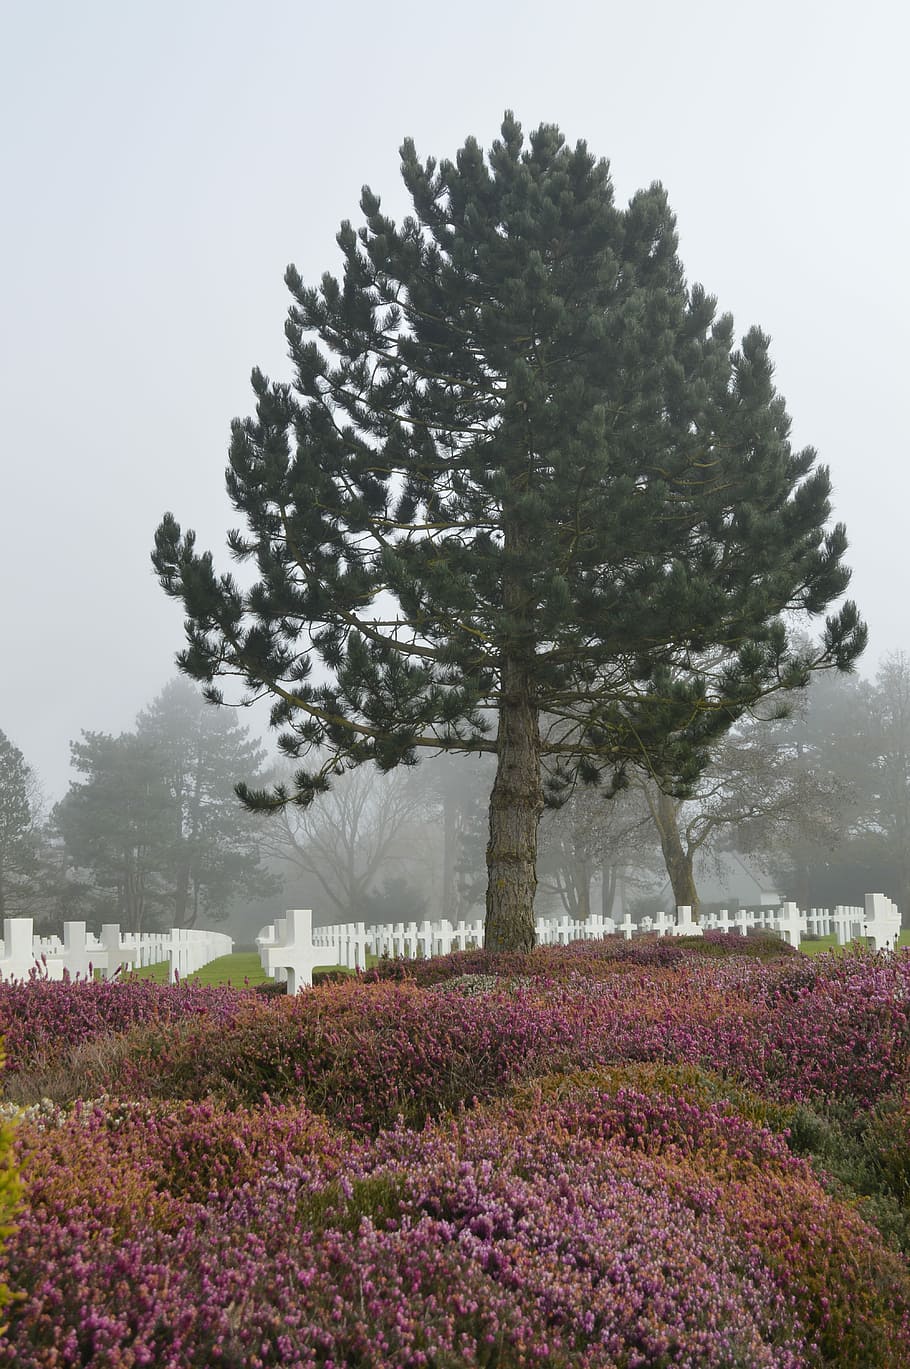 Tree, Cemetery, American, Fog, Falls, normandy, france, plants, tribute, commemoration